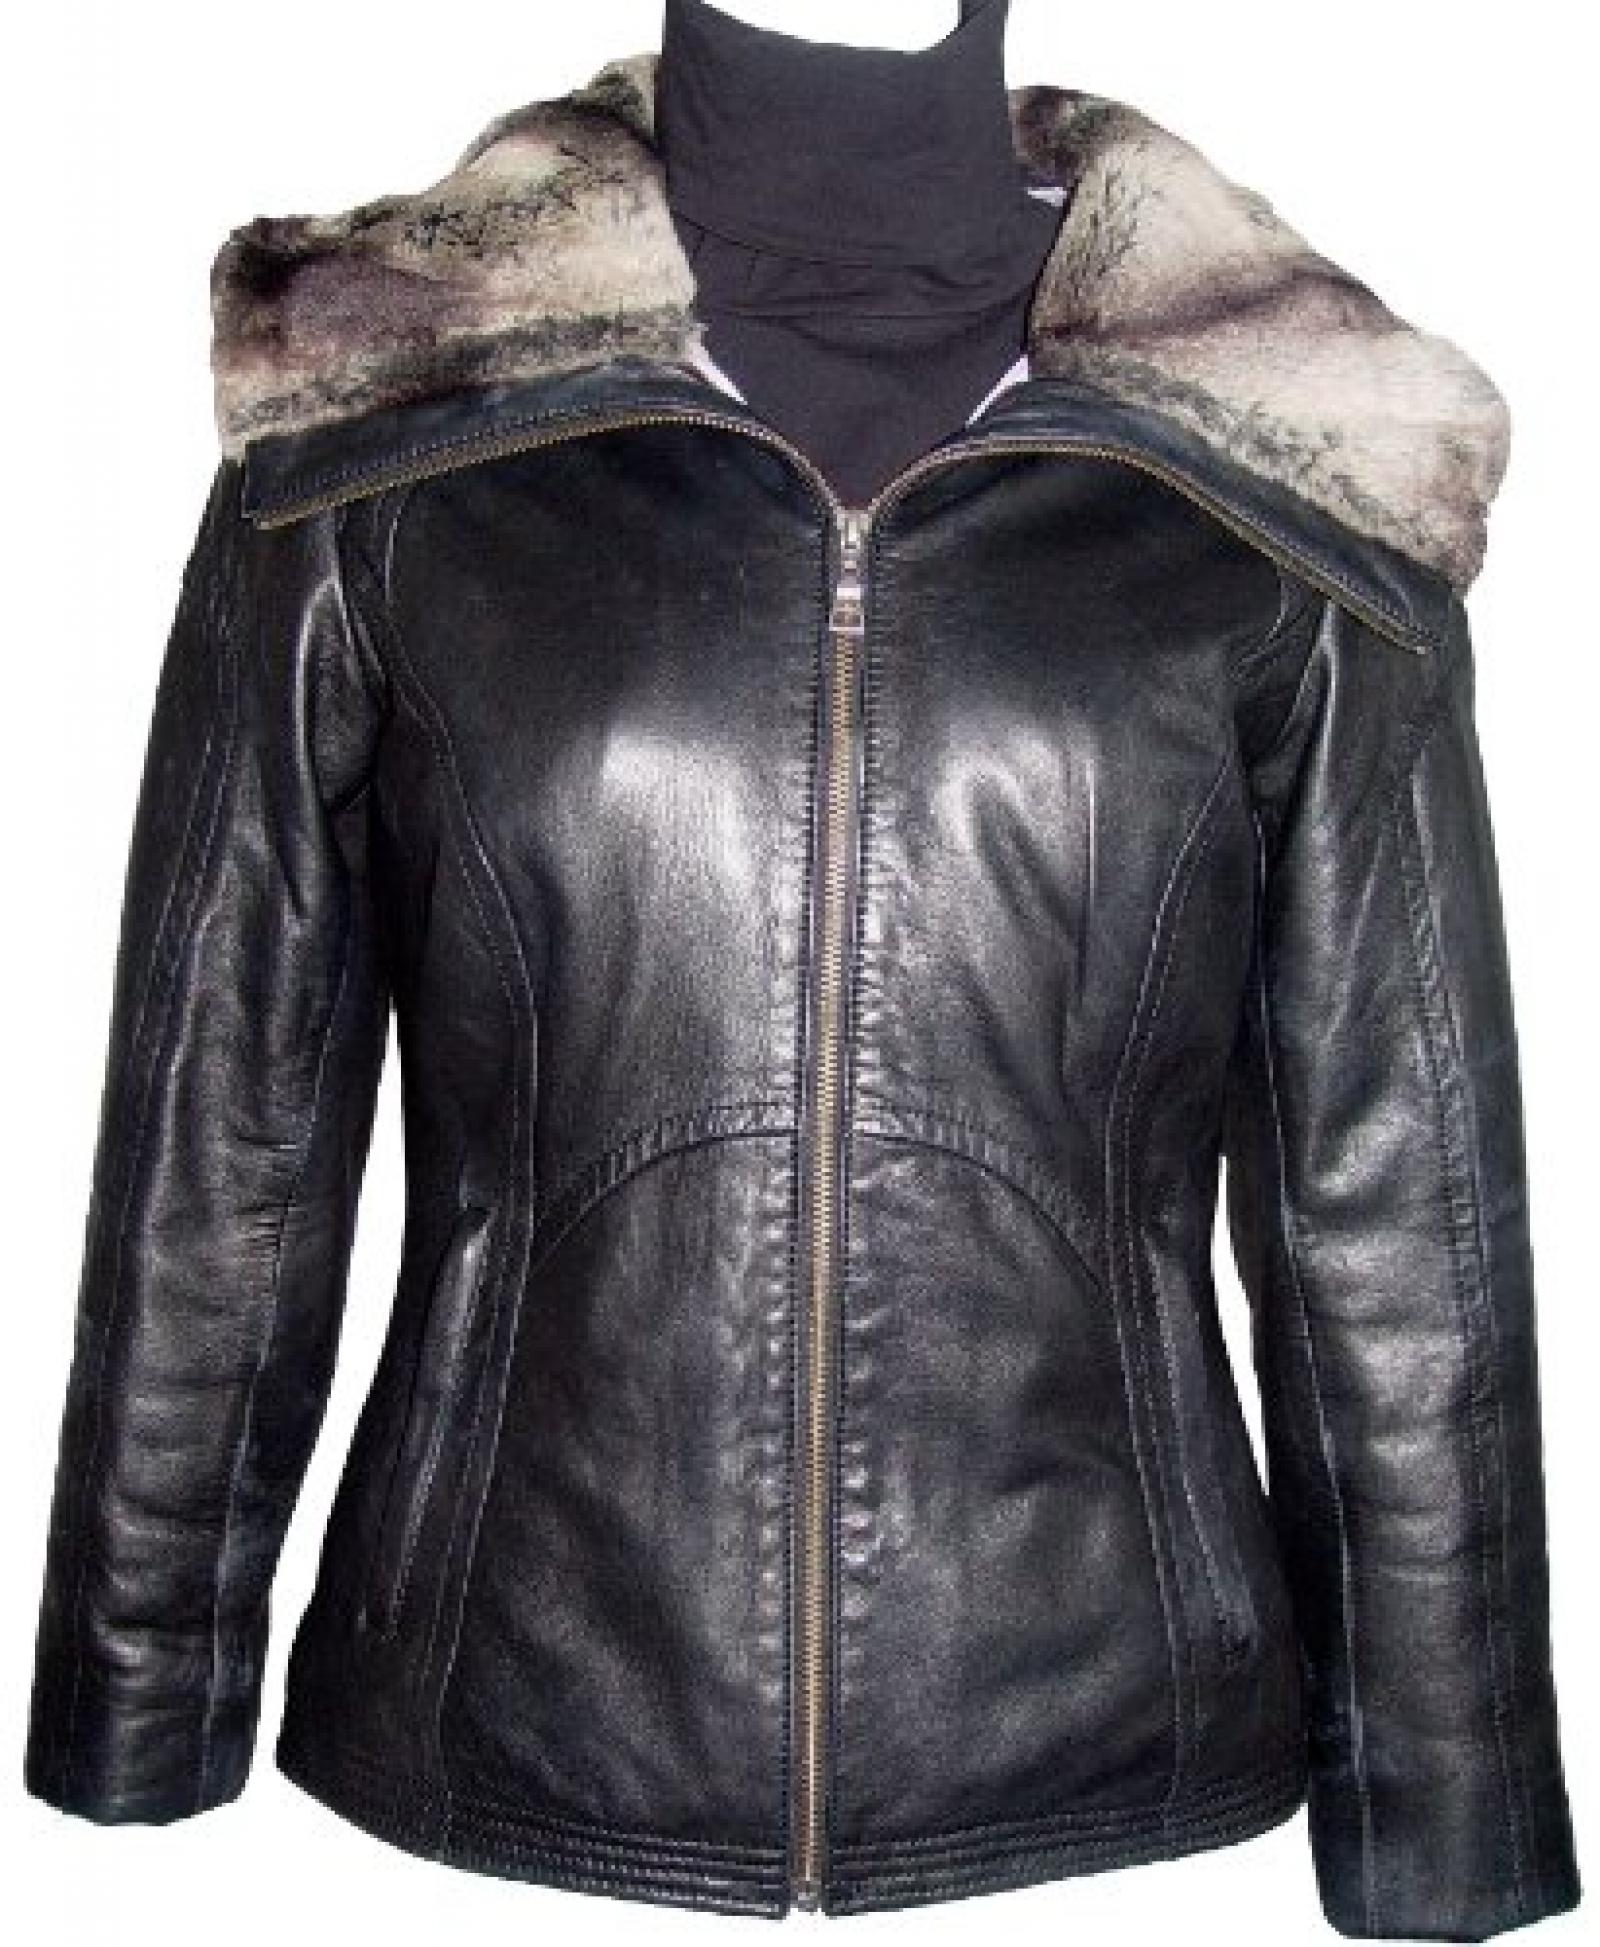 Paccilo FREE tailoring Womens 4000 Real Lambskin Short Leather Jacket Parka 